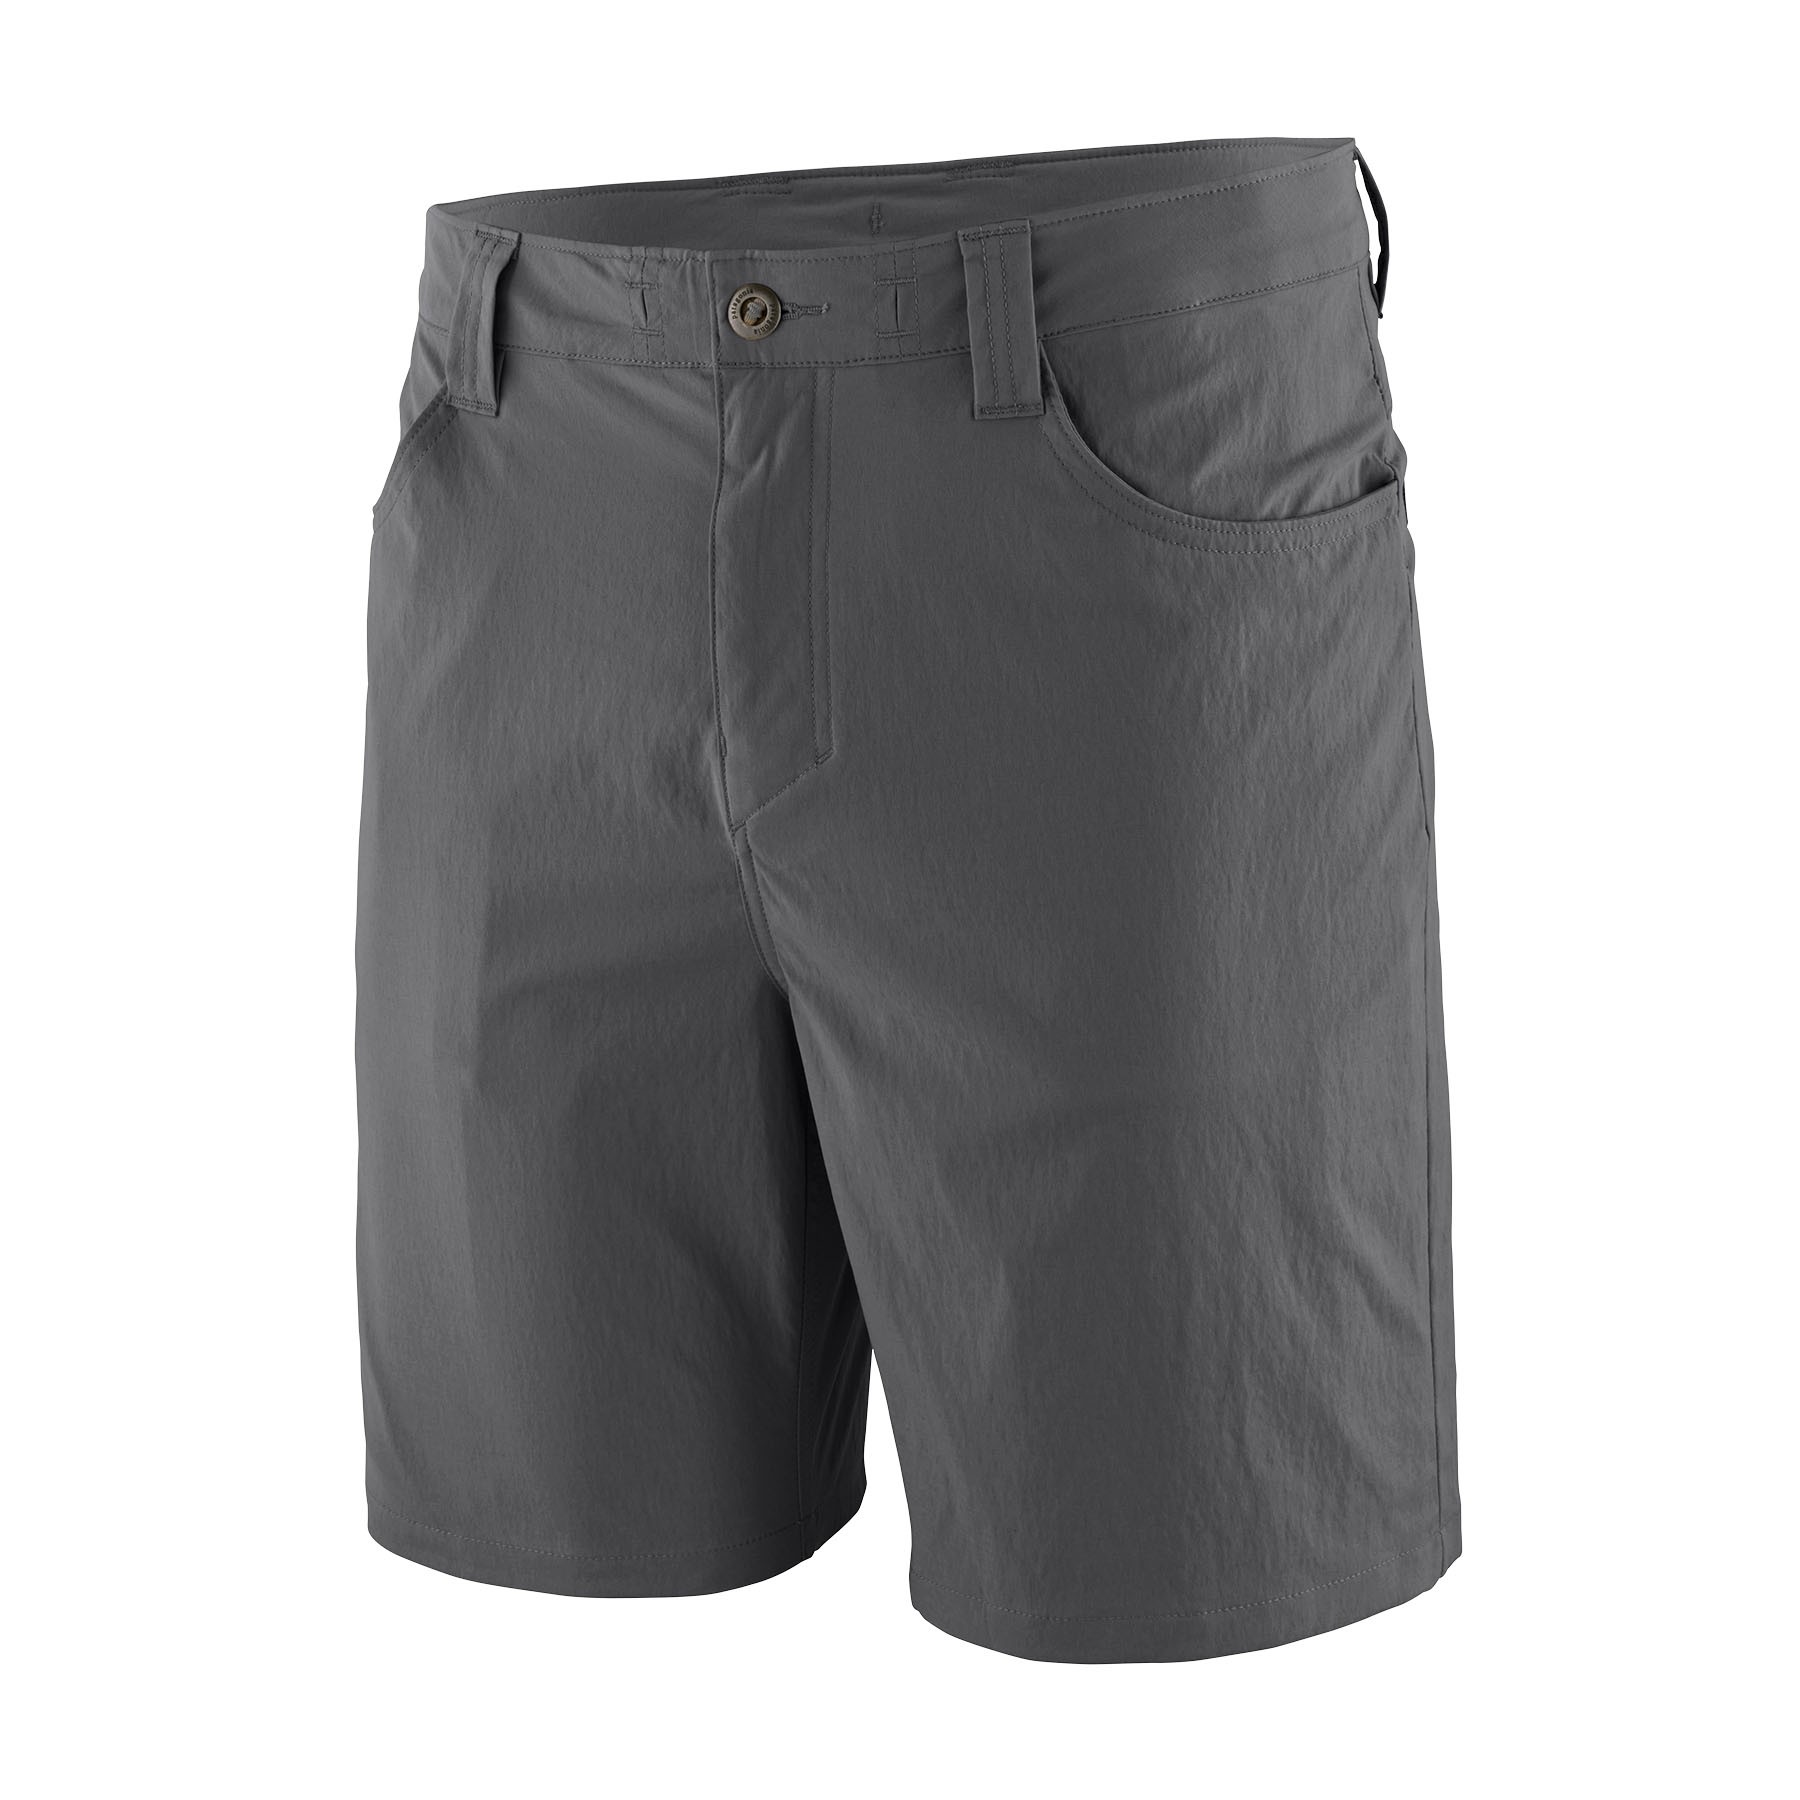 Patagonia Men's Quandary Shorts - 10" : Forge Grey